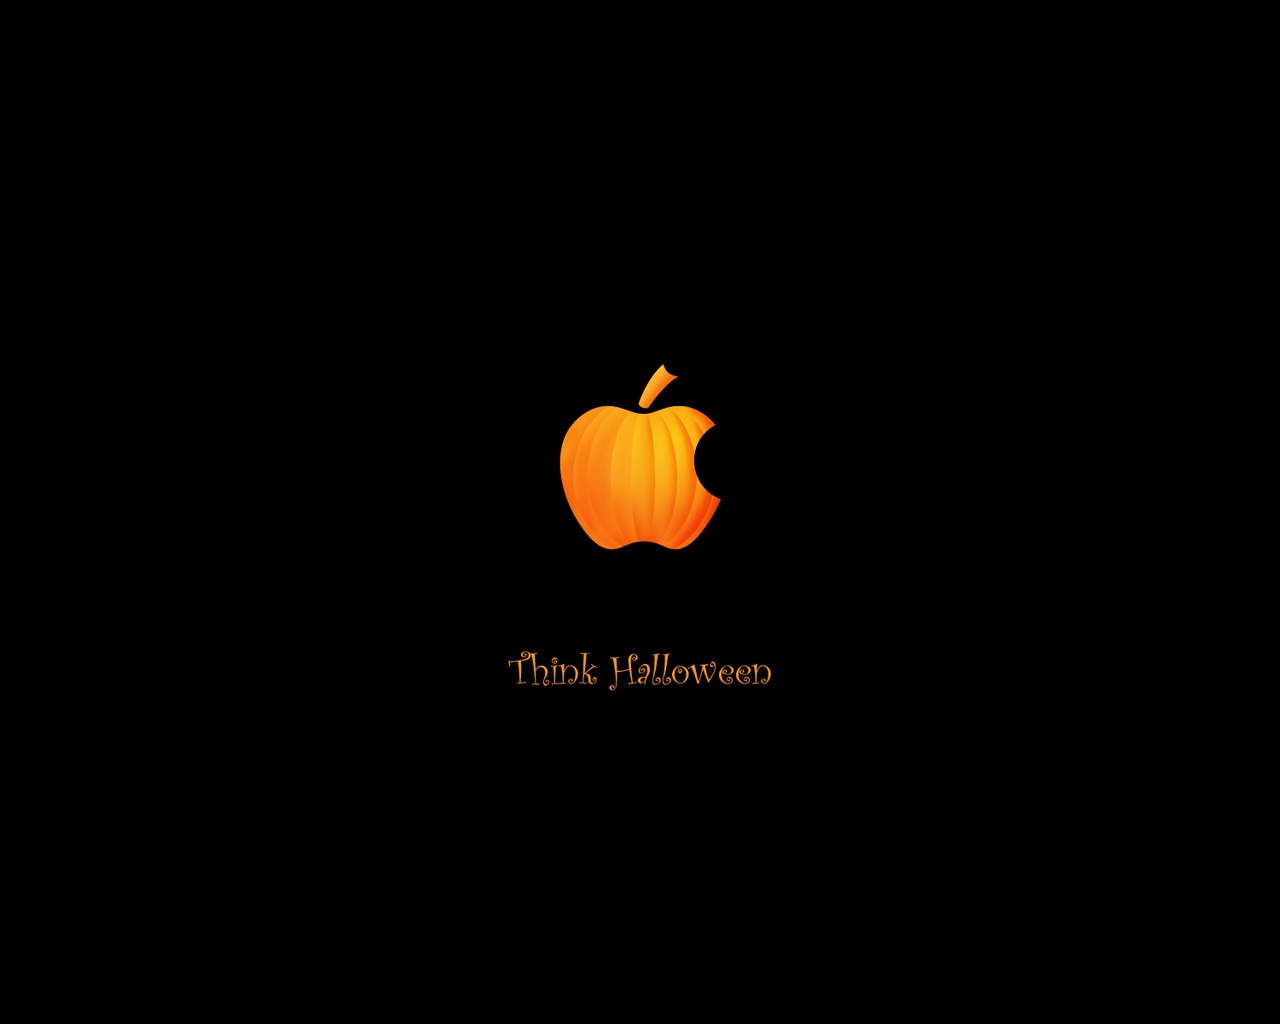 Think Halloween for 1280 x 1024 resolution